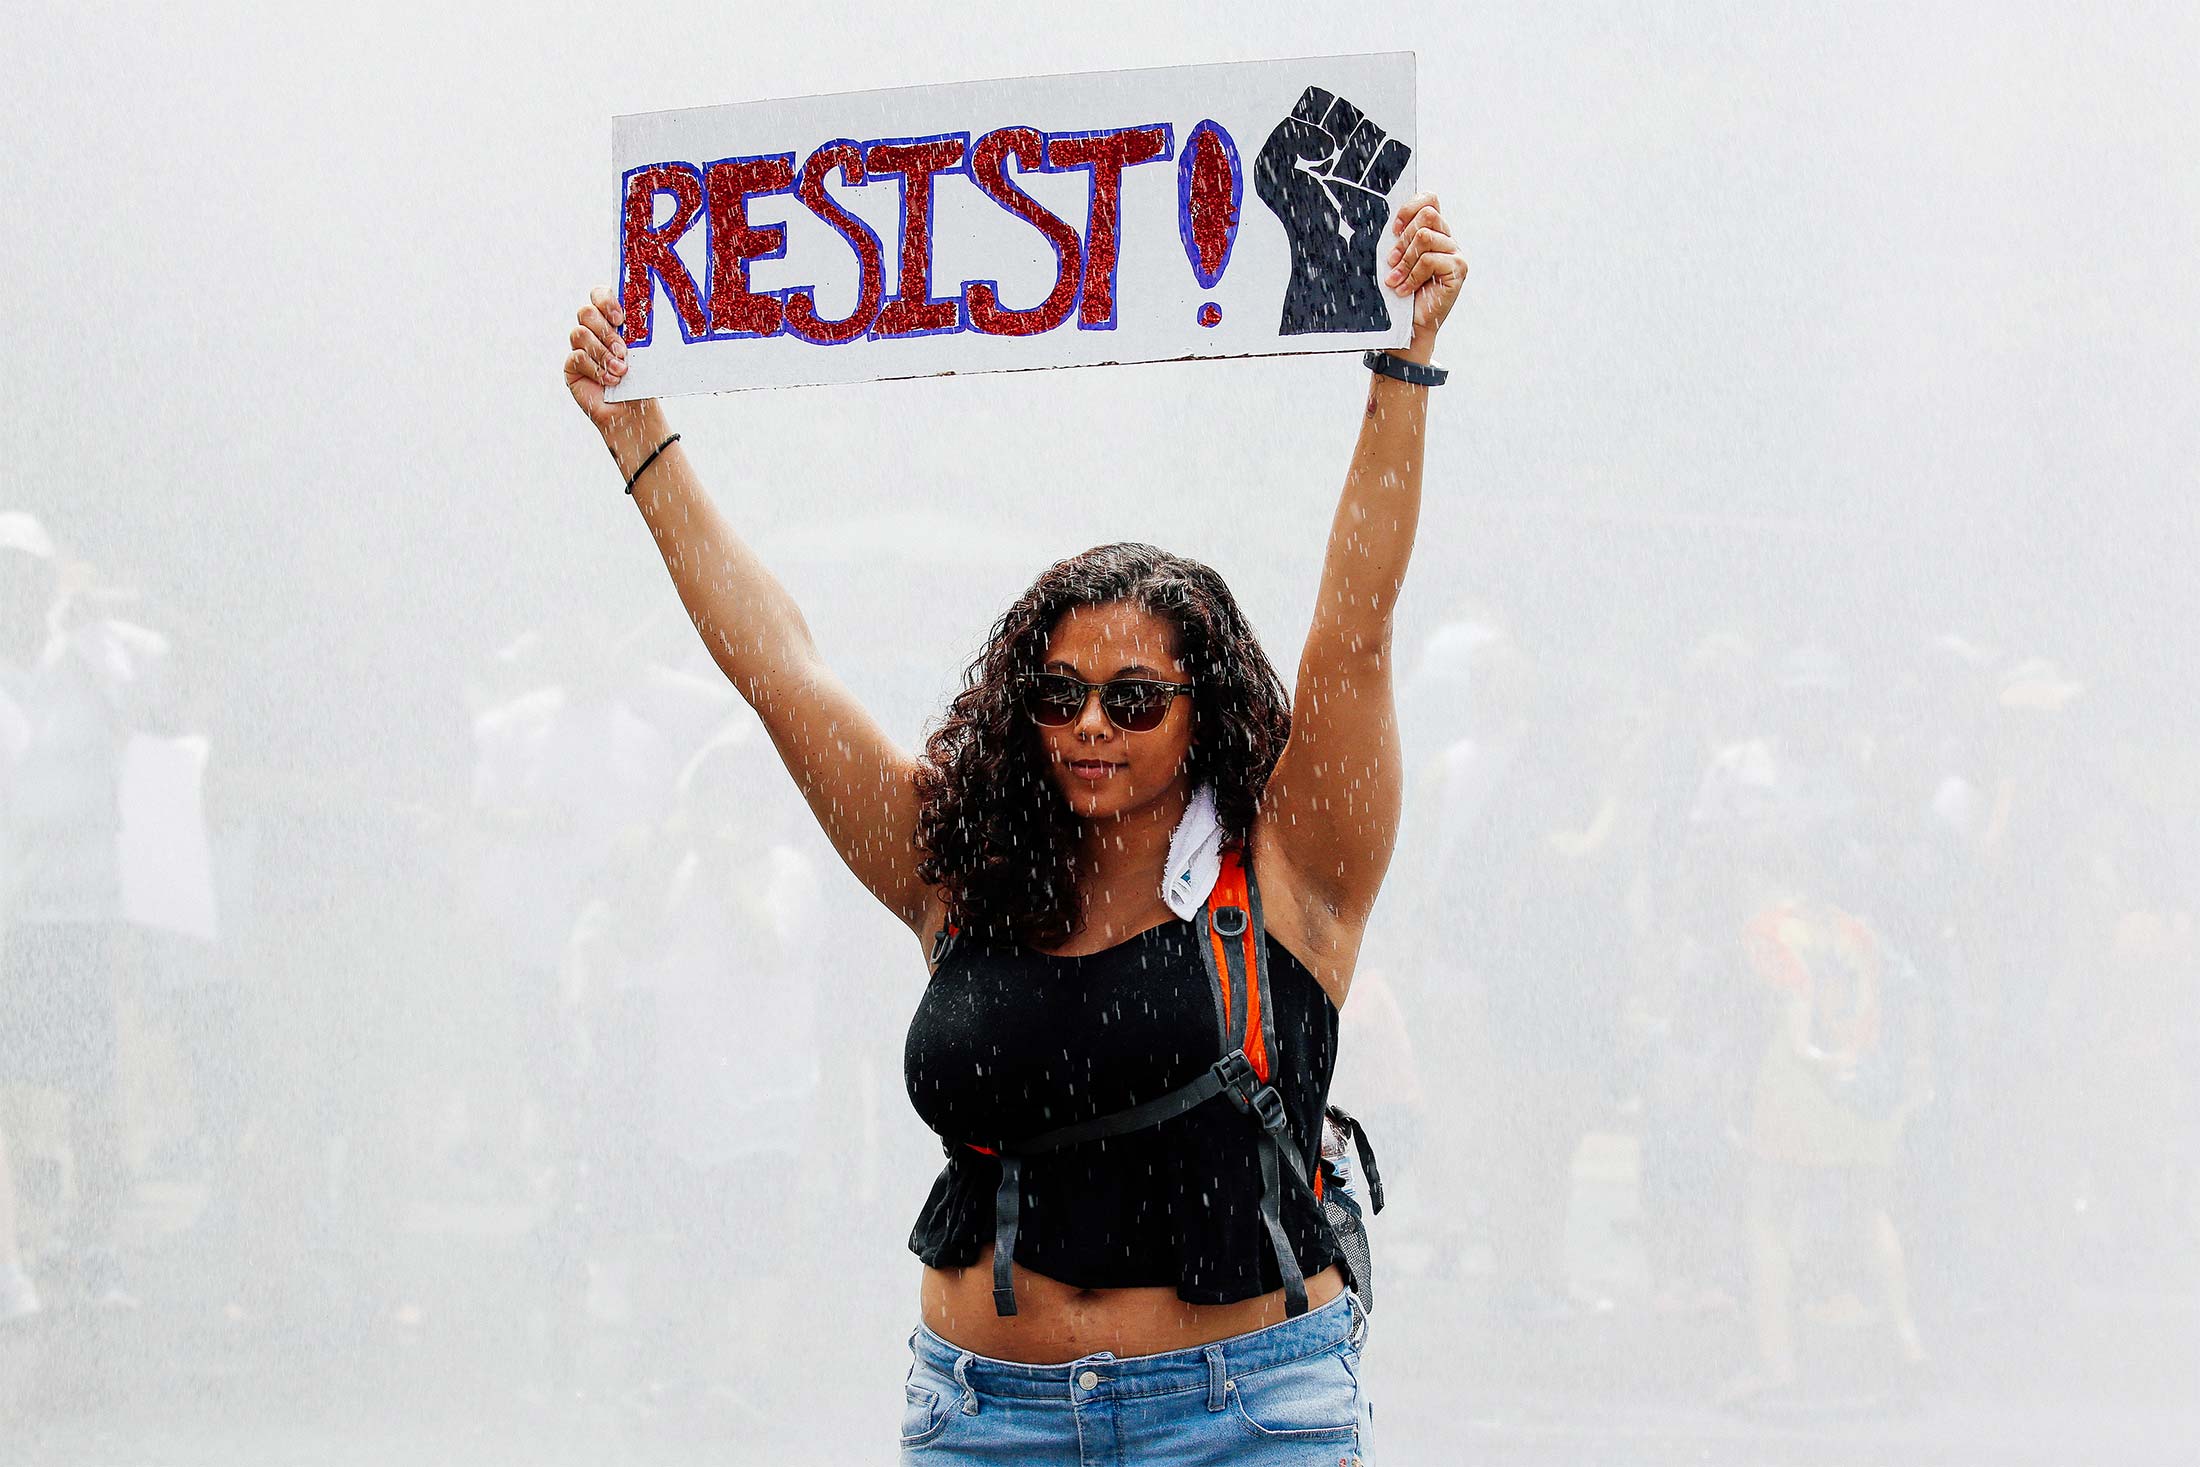 A young woman defiantly holds up a "RESIST!" sign as she stands in a spray of water from a fire truck during a protest.